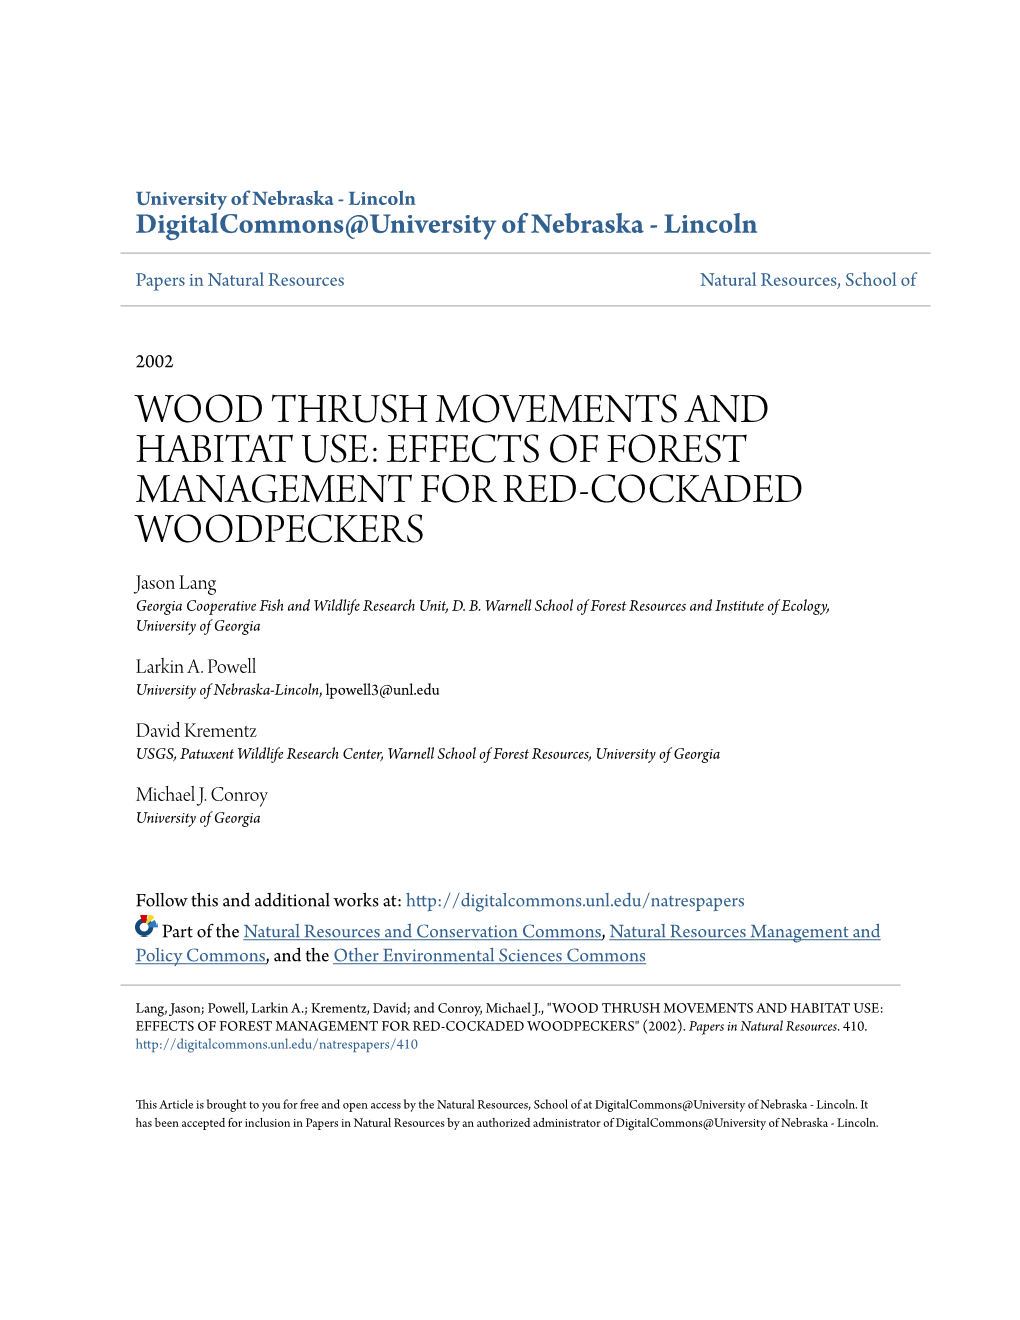 WOOD THRUSH MOVEMENTS and HABITAT USE: EFFECTS of FOREST MANAGEMENT for RED-COCKADED WOODPECKERS Jason Lang Georgia Cooperative Fish and Wildlife Research Unit, D